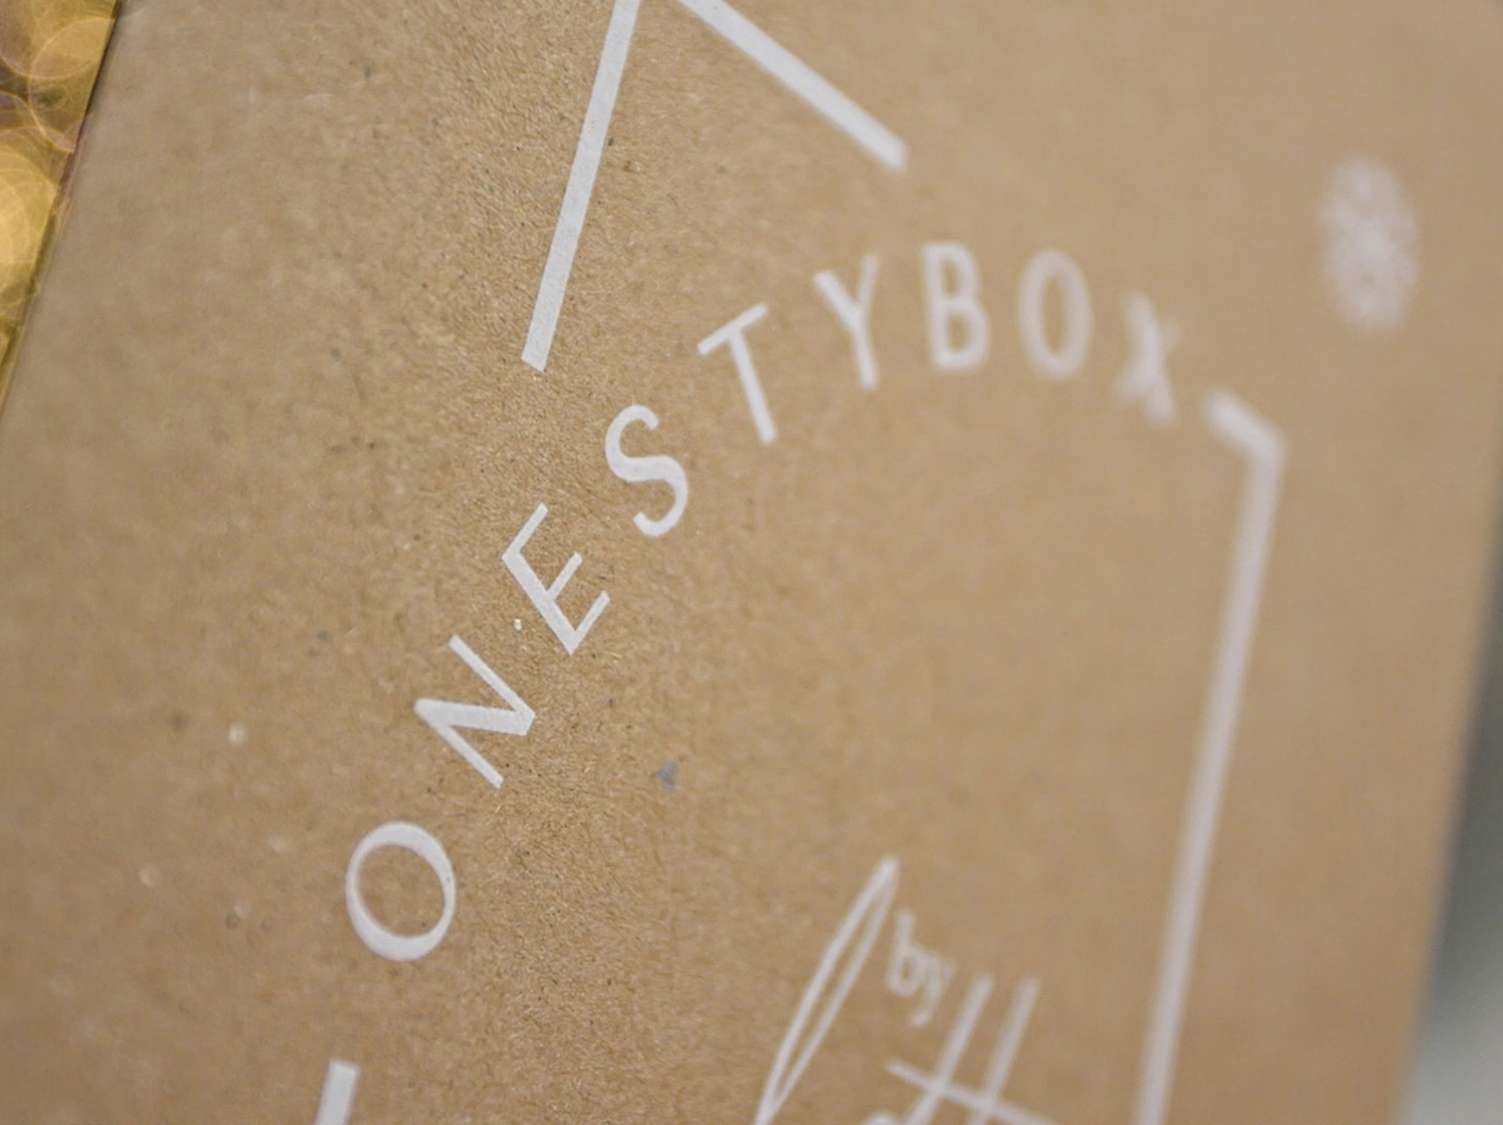 onestybox front cover. A close up photograph of the onestybox logo printed in white on a Kraft paper book cover